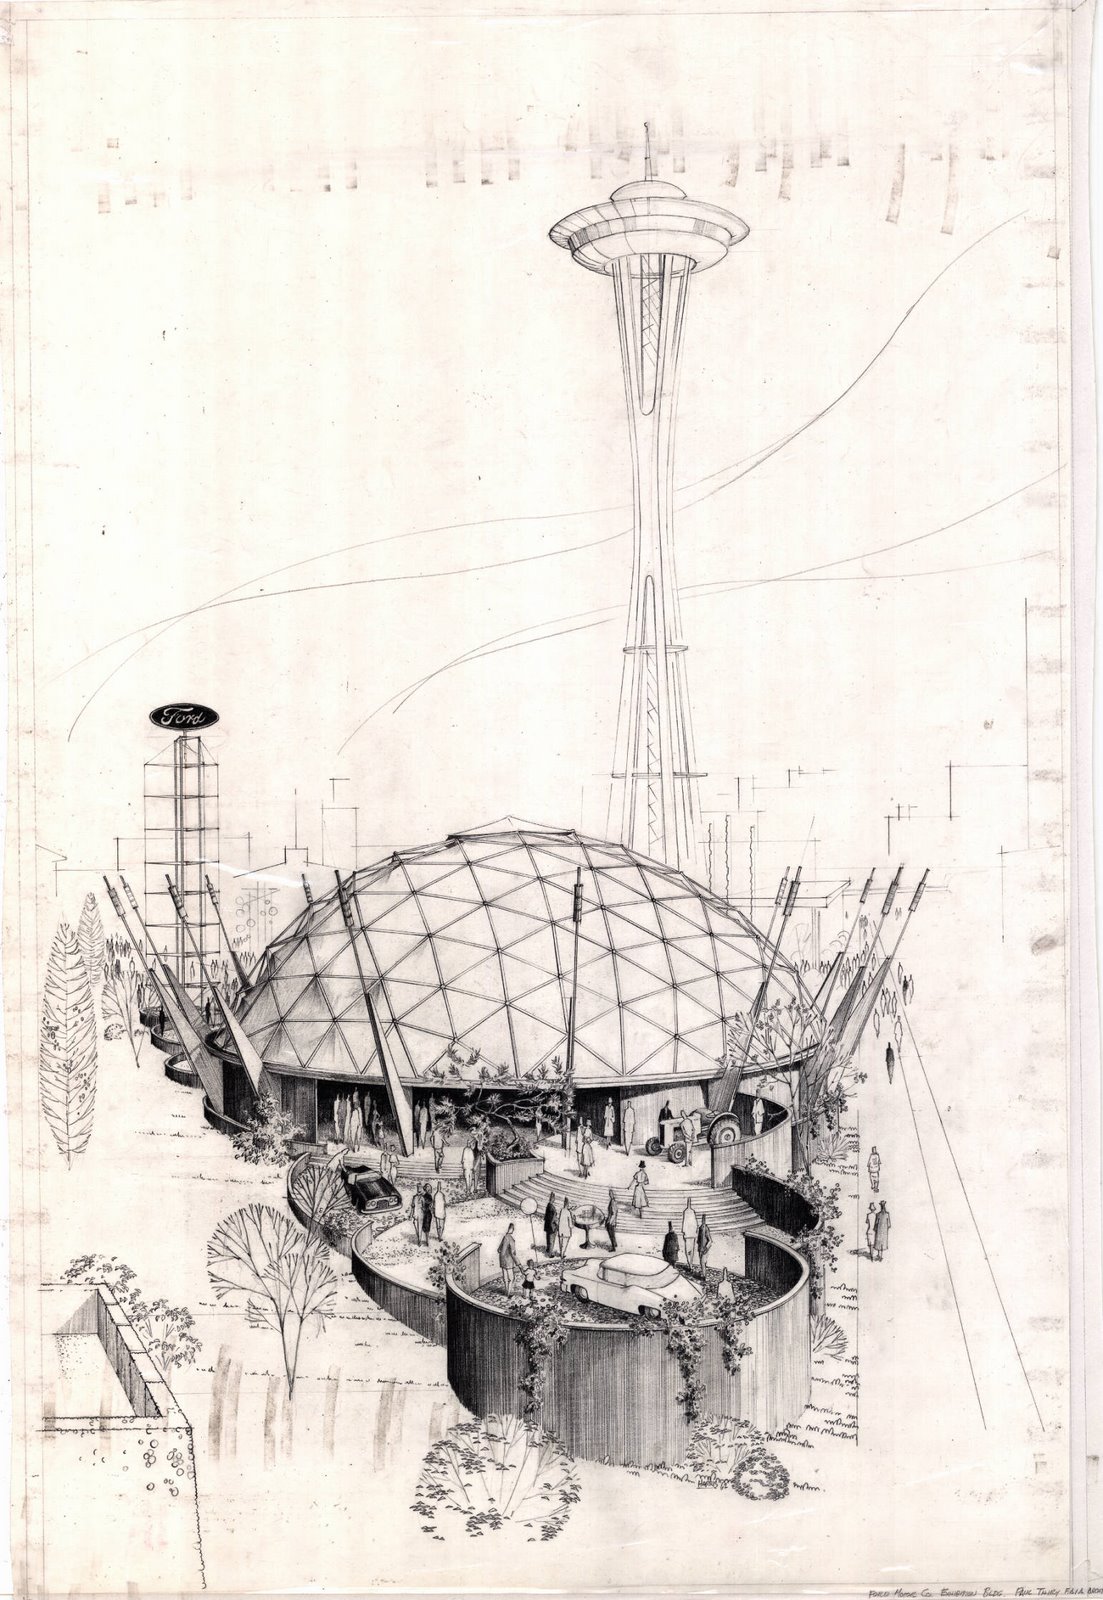 [Under+the+geodesic+dome+of+the+Ford+Pavilion,+visitors+were+entertained+by+a+simulated+flight+to+outer+space+in+a+model+rocket+ship.jpg]